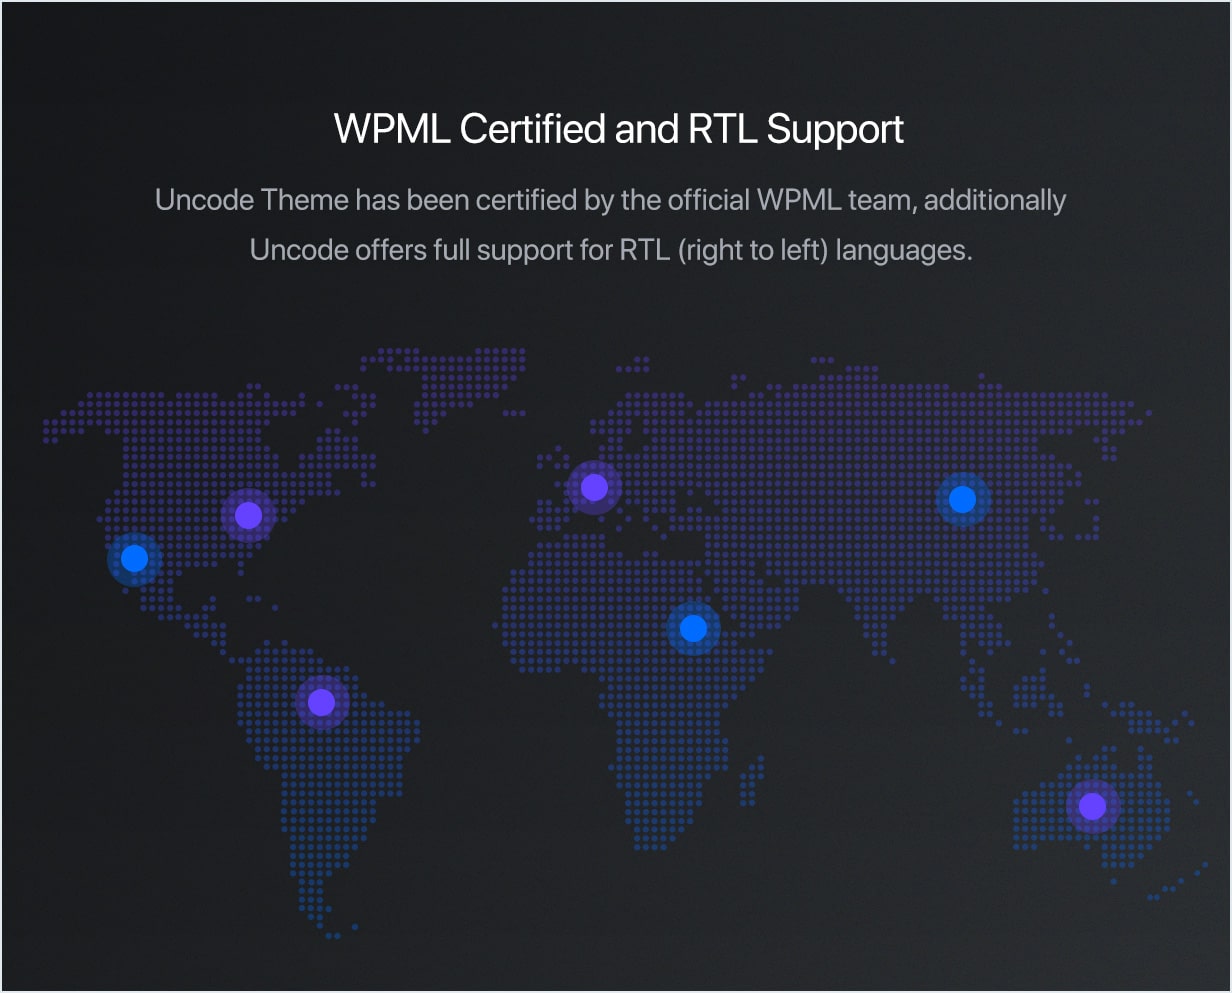 WPML and RTL Support